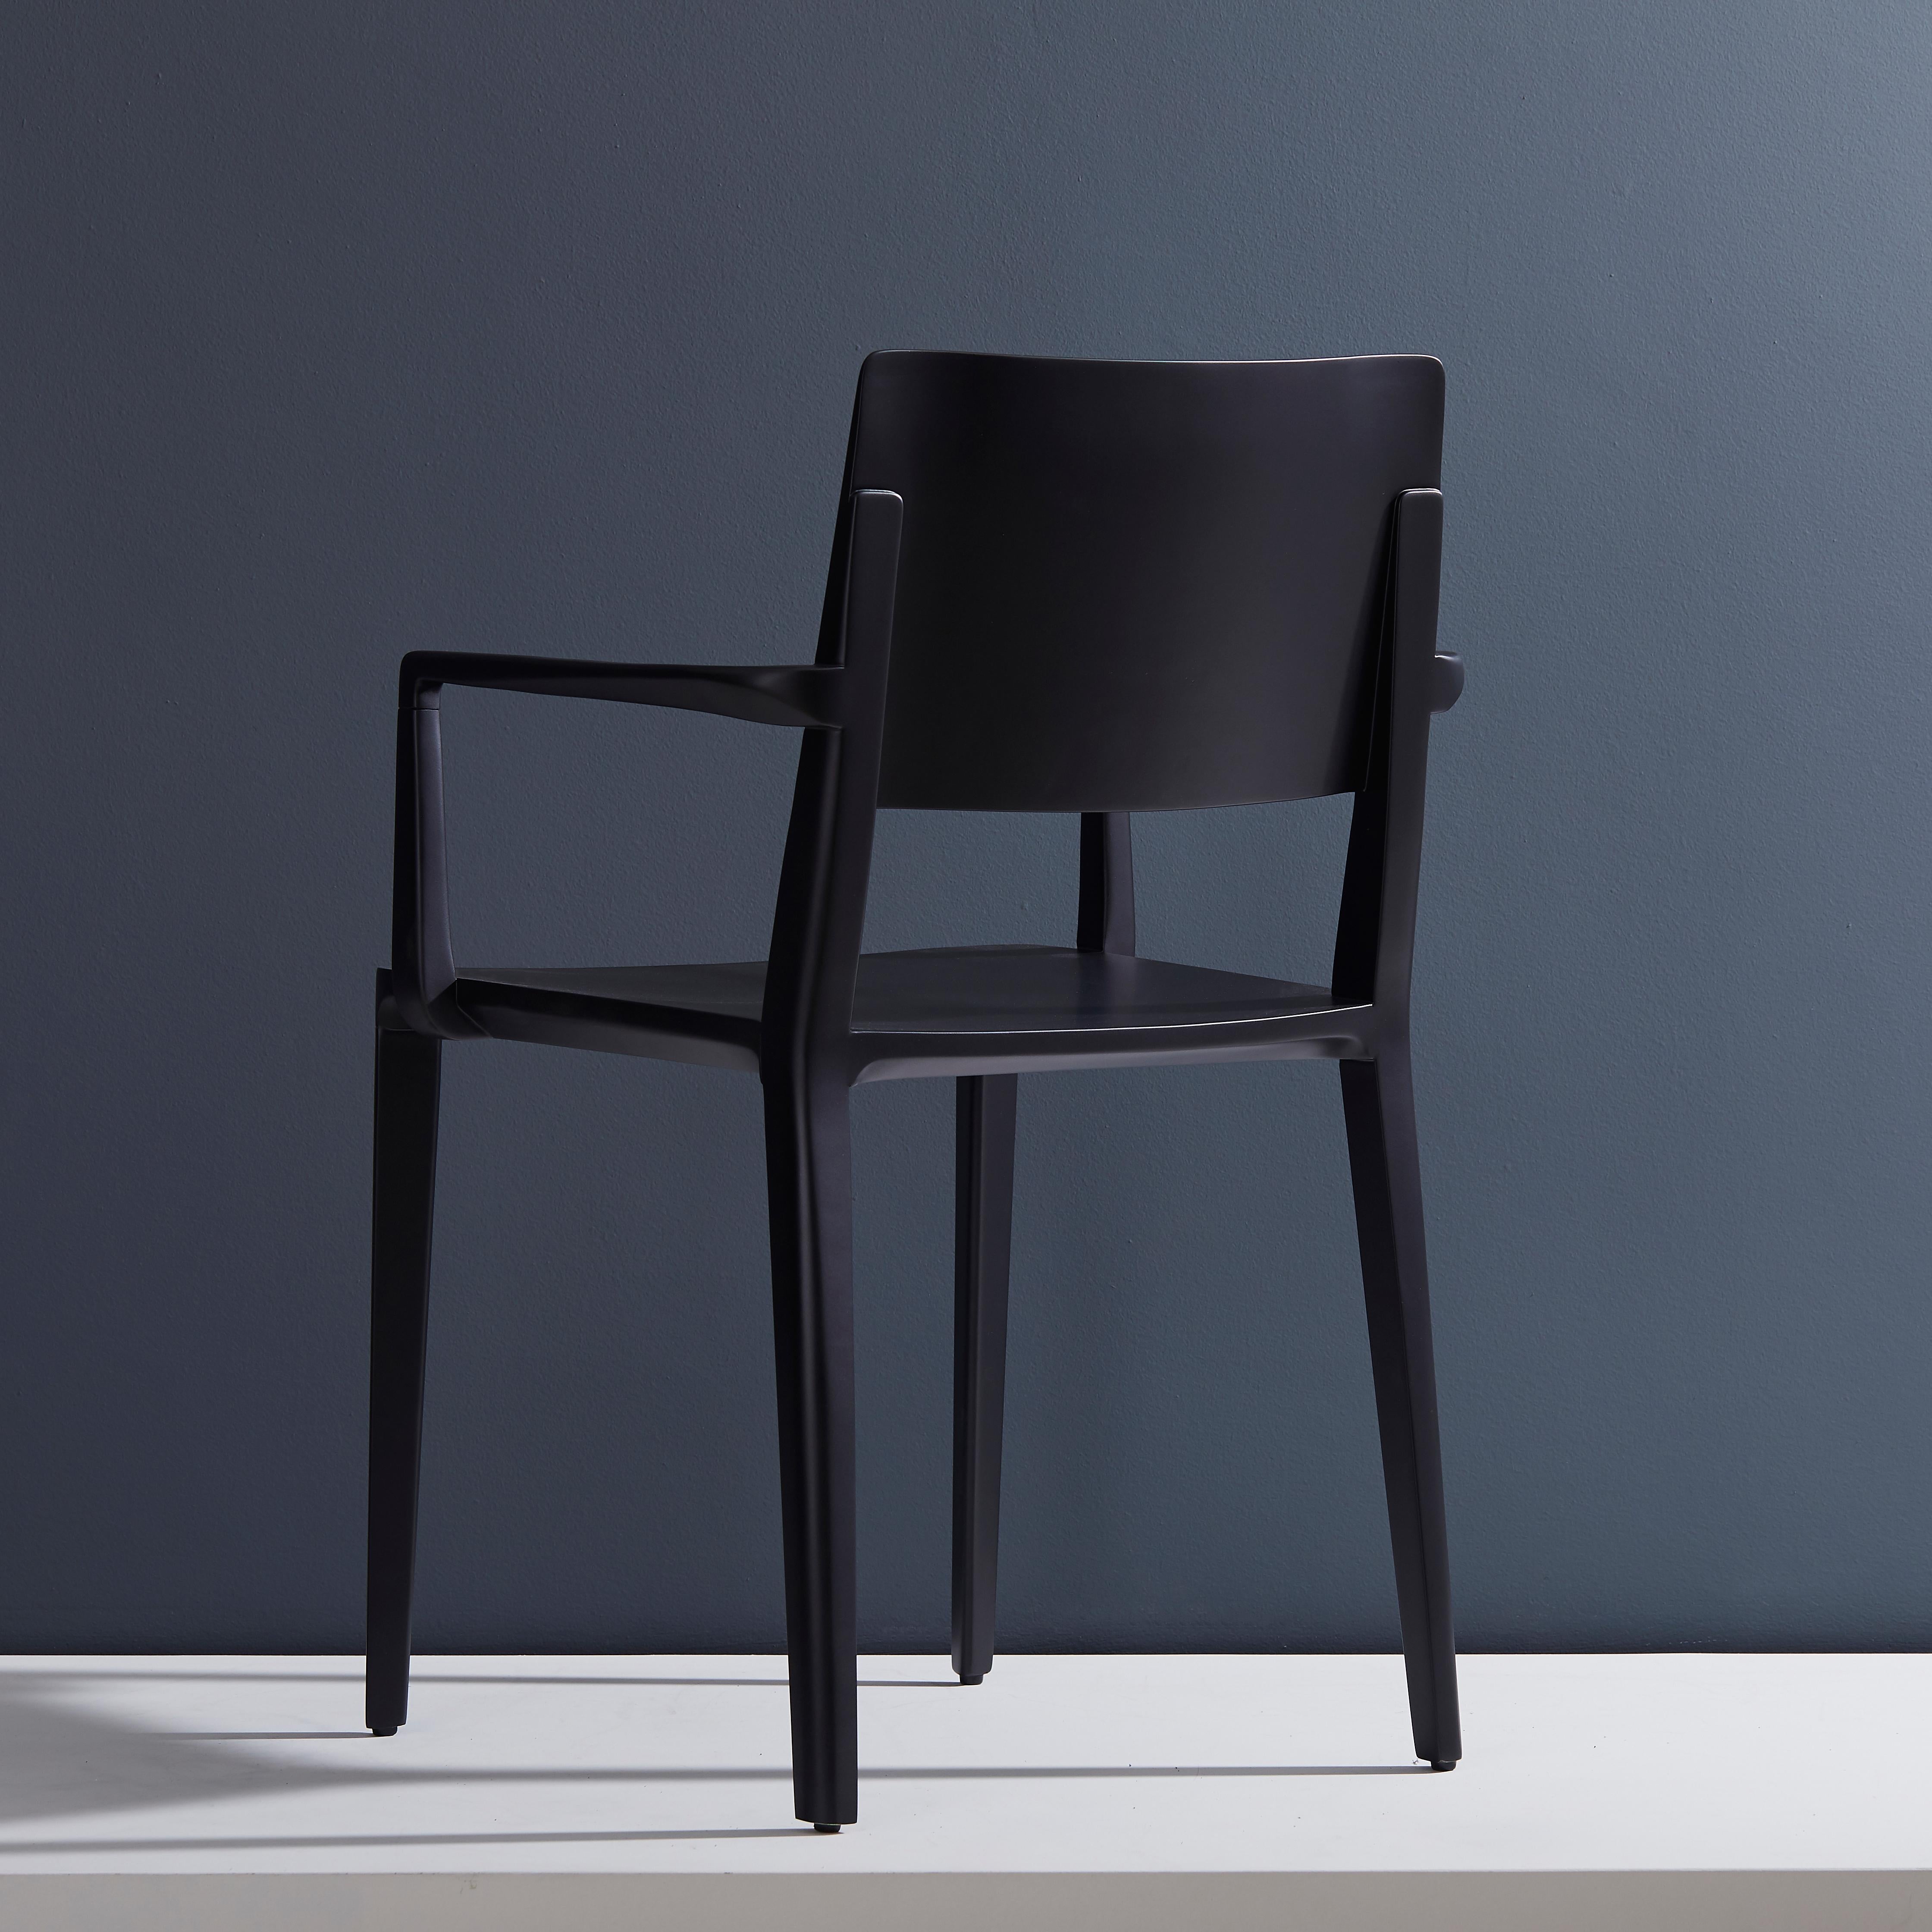 Brazilian Minimalist Modern Chair in Solid Wood Black Finish with Arms For Sale